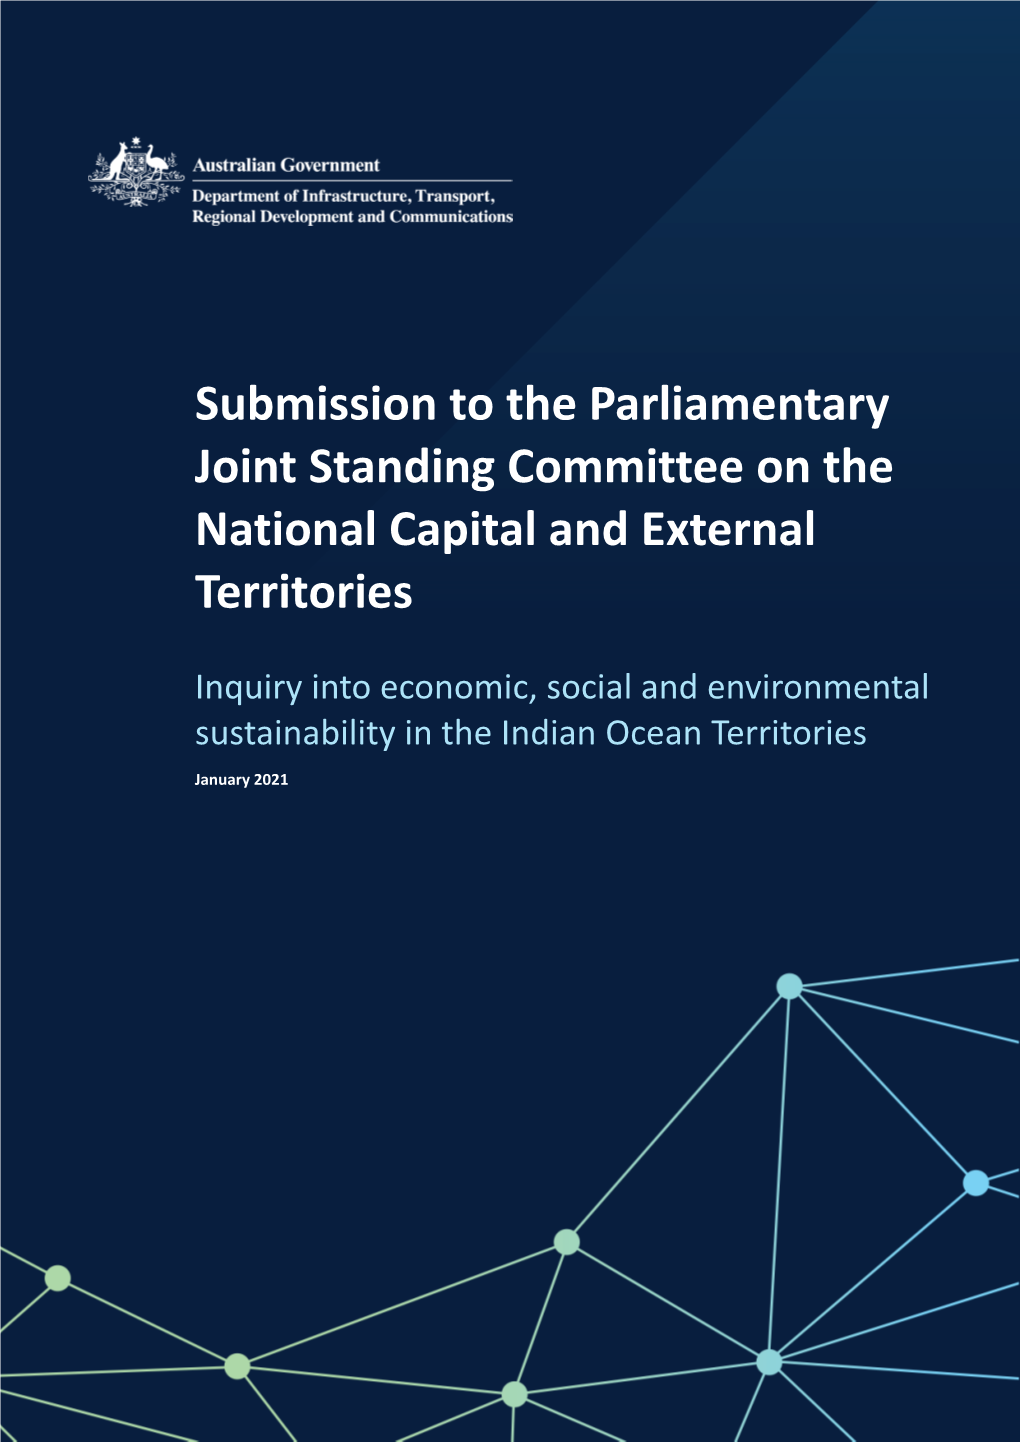 Submission to the Parliamentary Joint Standing Committee on the National Capital and External Territories